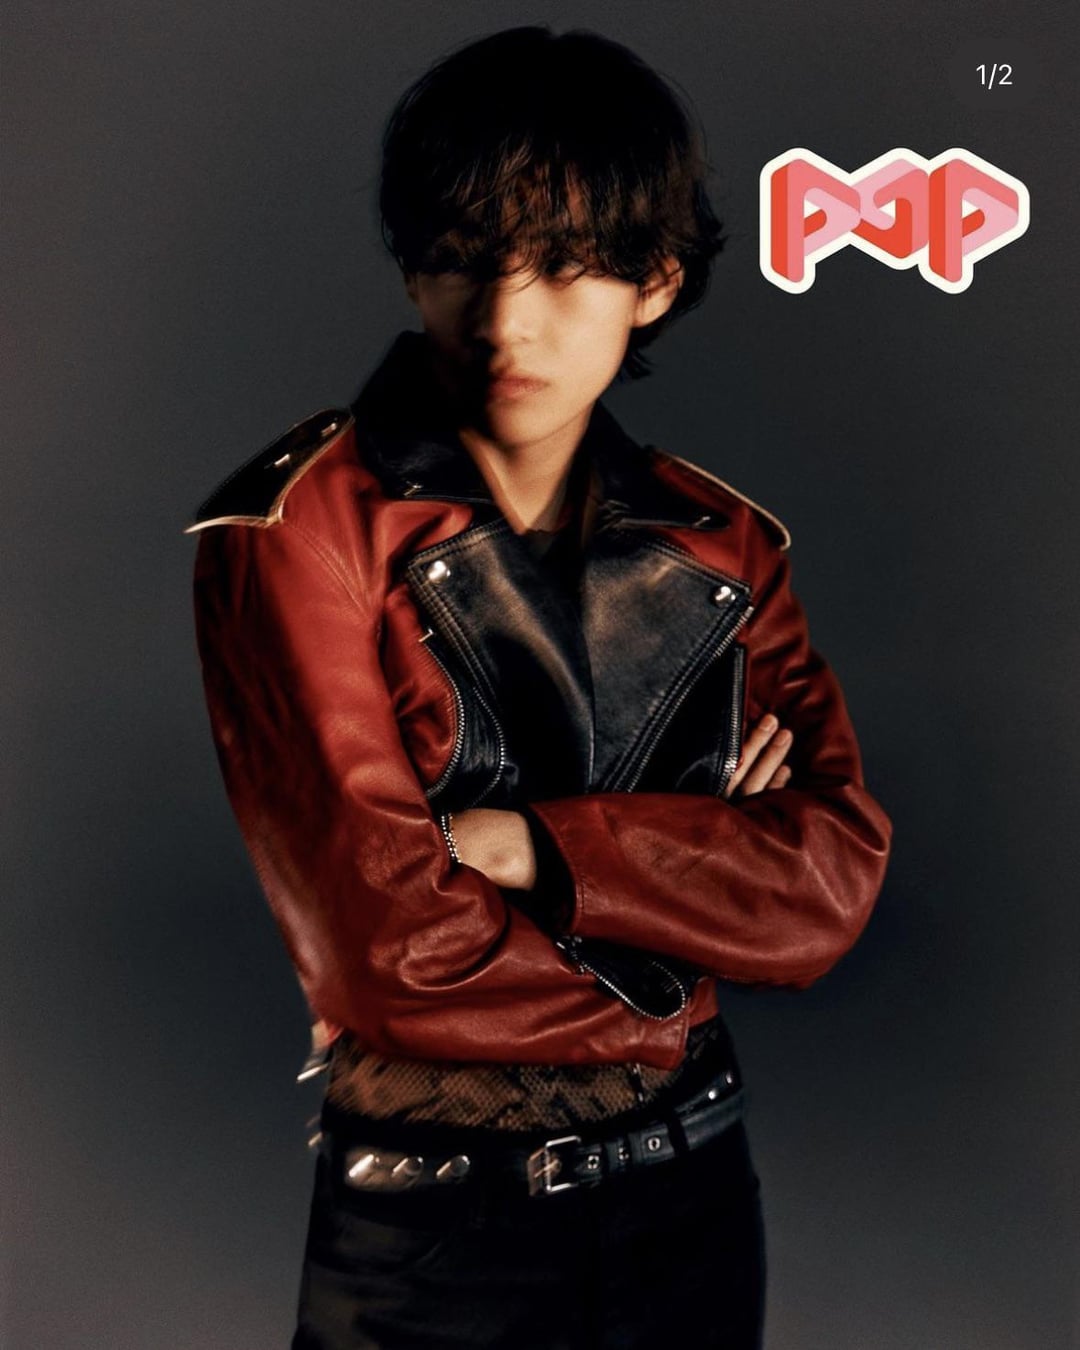 [Pop Magazine] Taehyung for September 2023 issue pictorial preview (2) - 090823